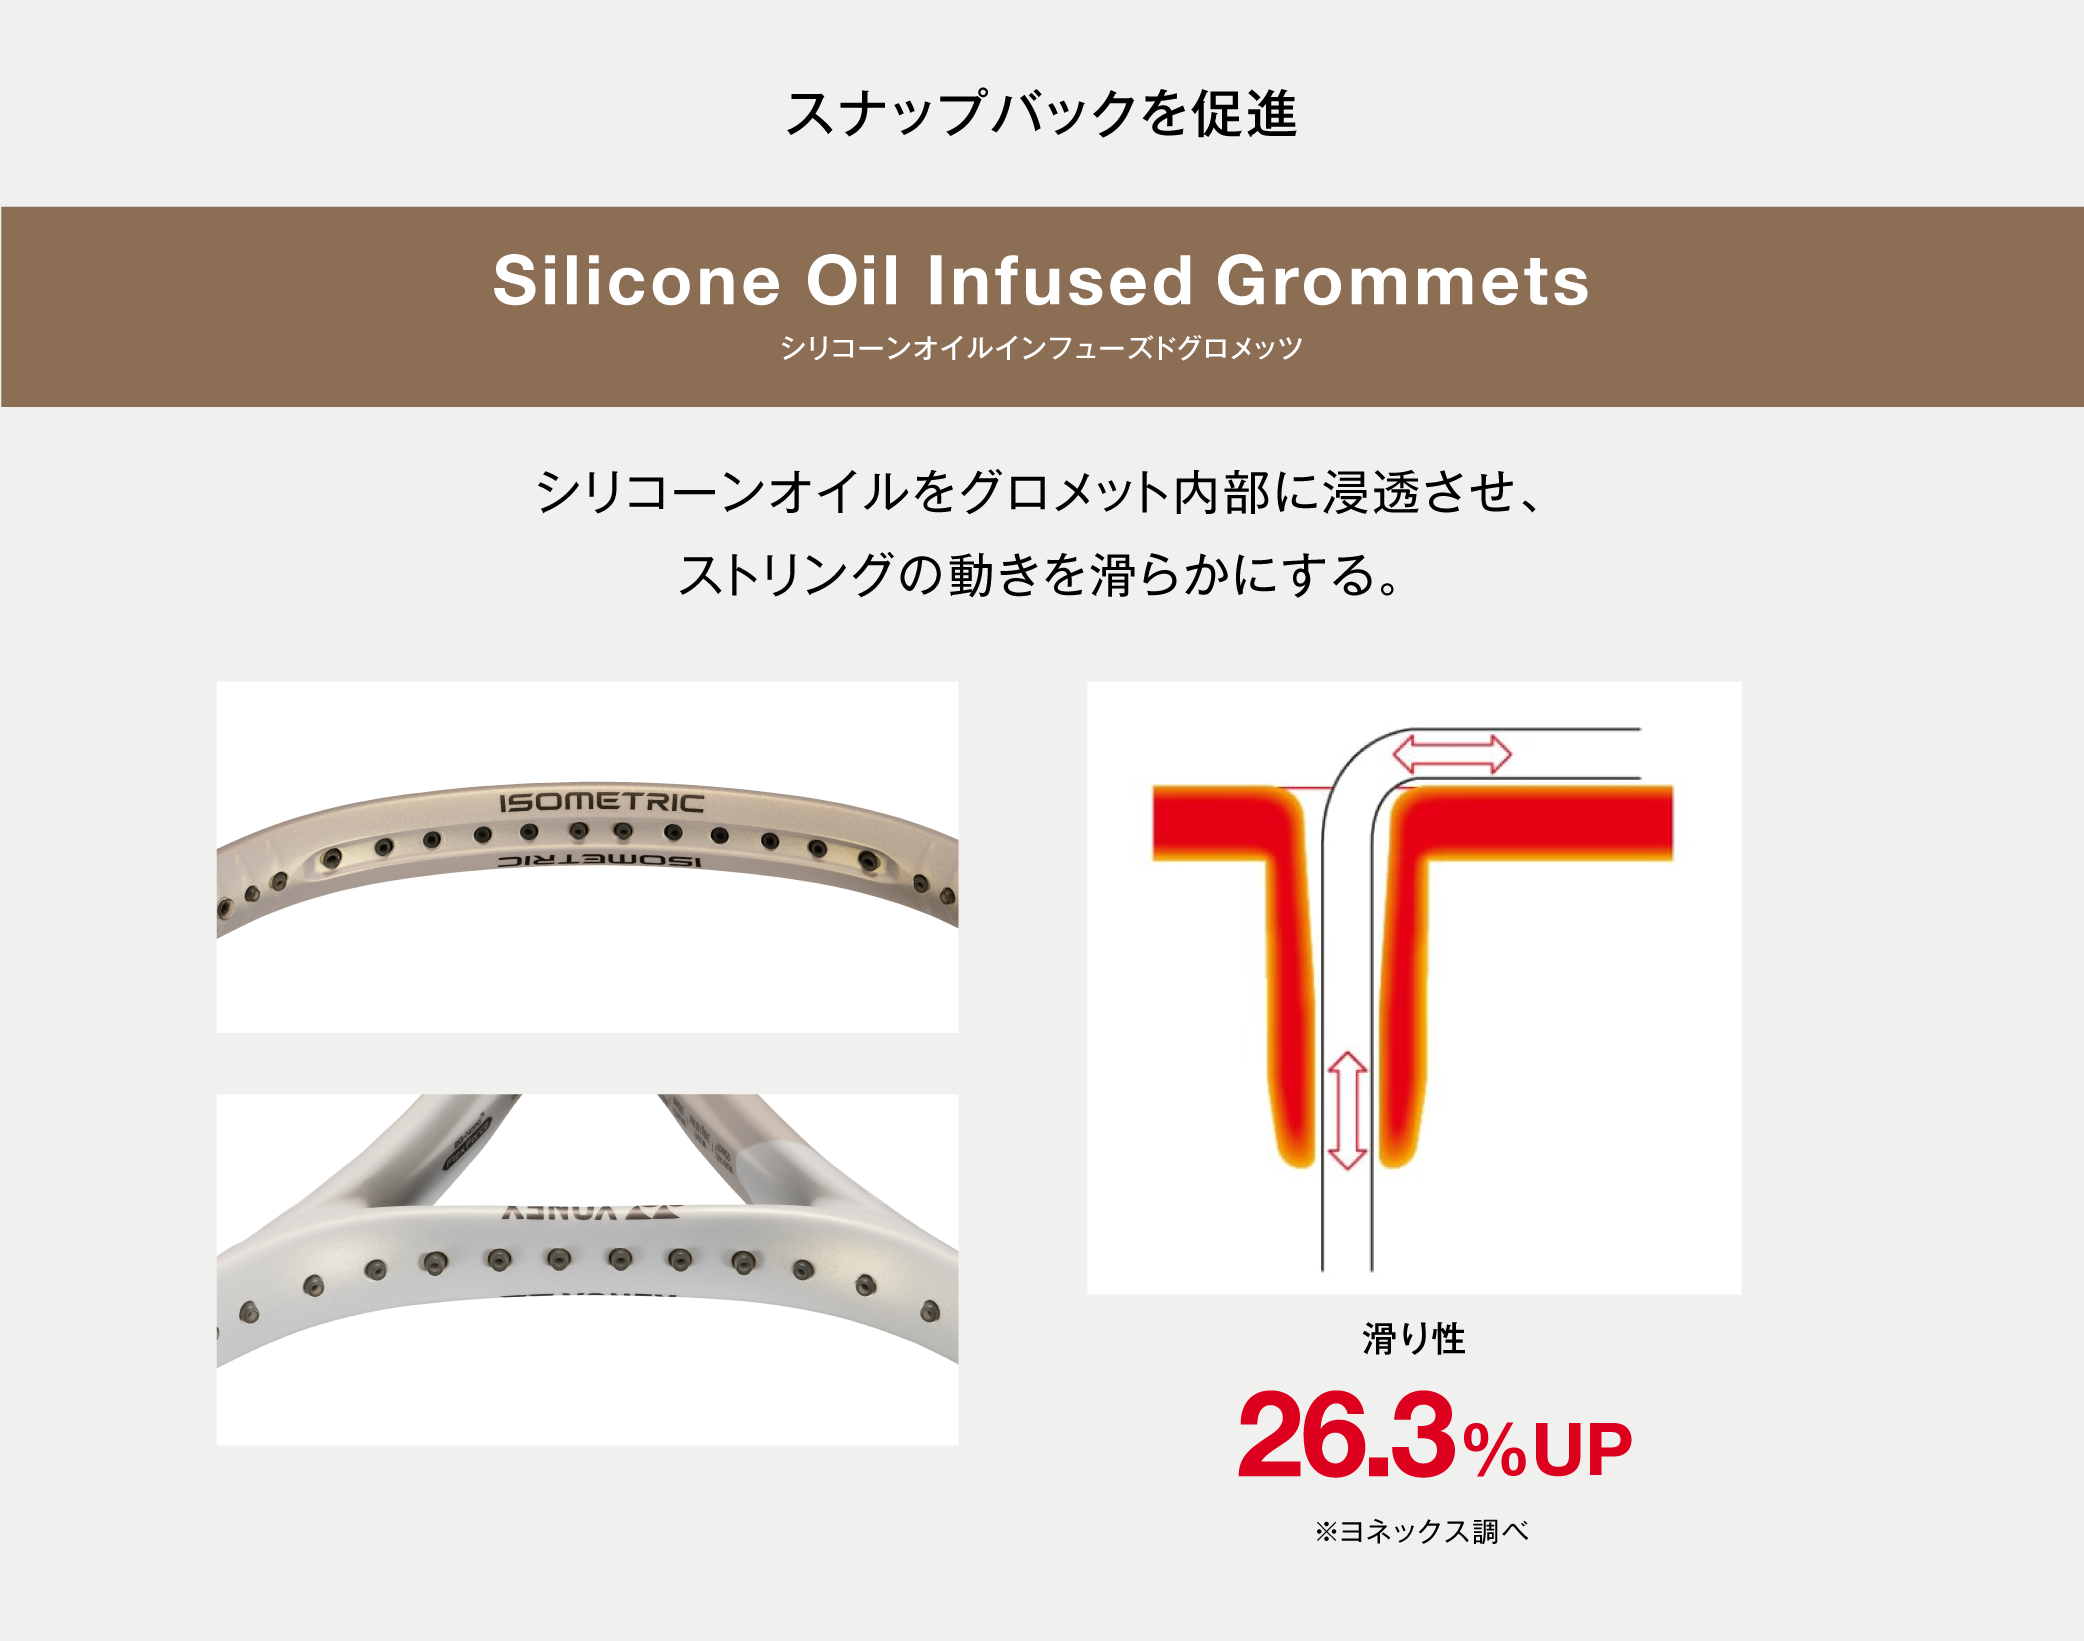 Silicone Oil Infused Grommets